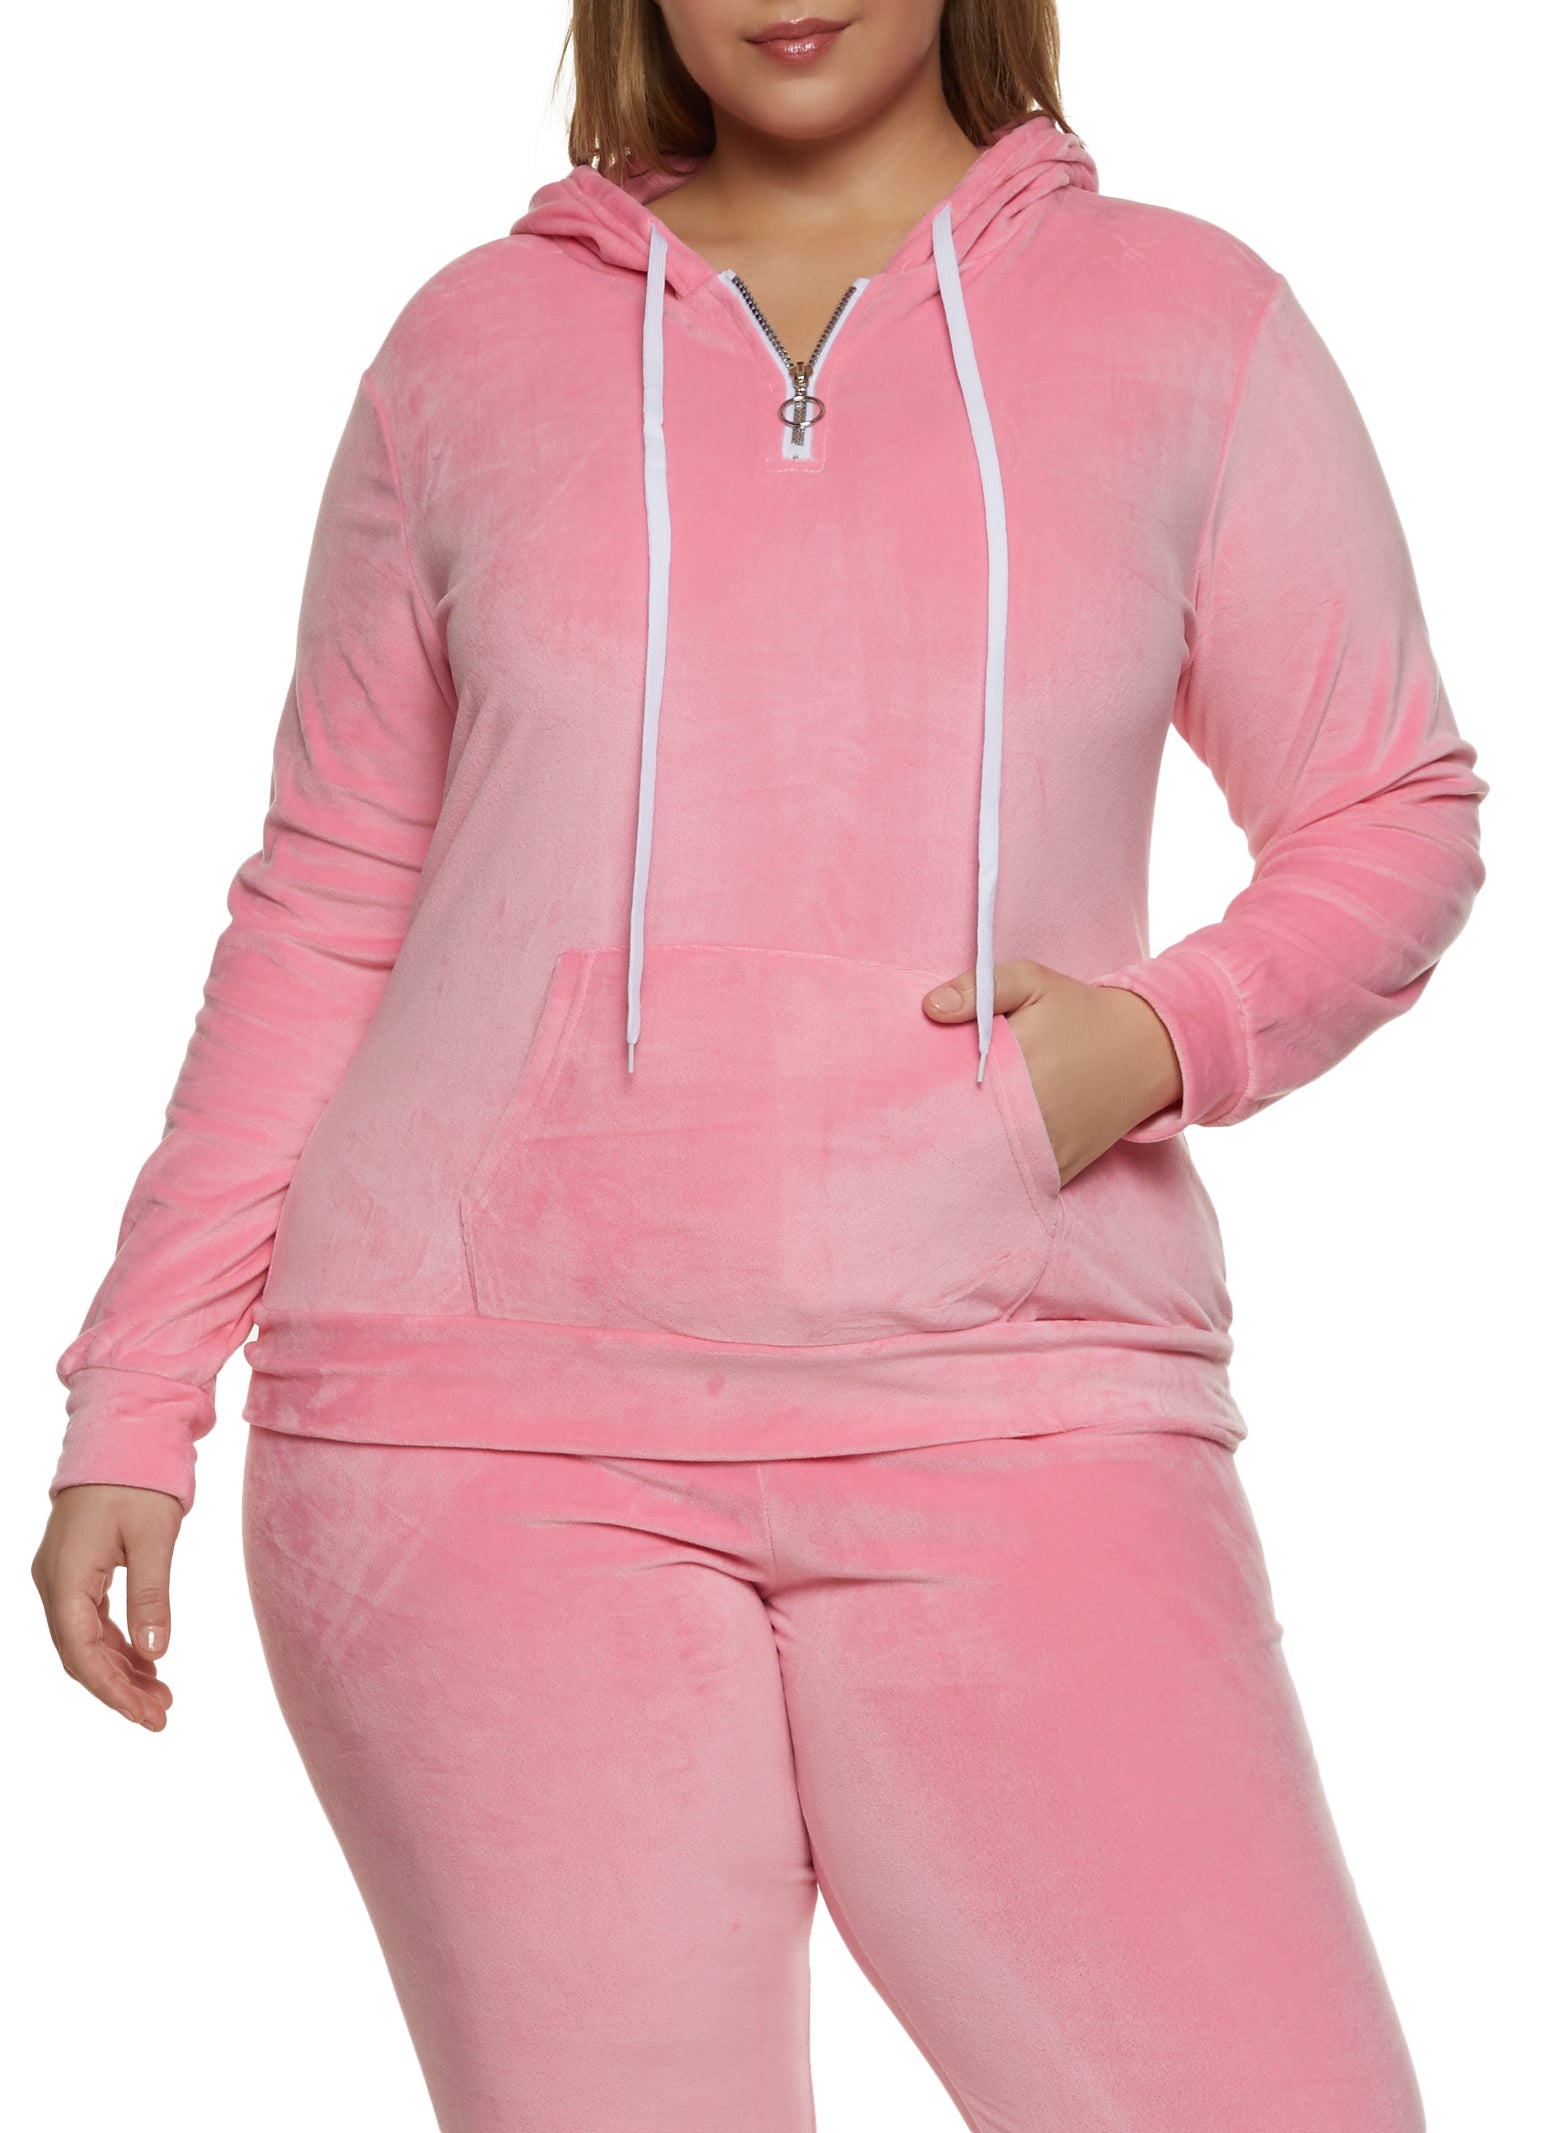 CLOSEOUT CLEARANCE! Plus Size Pink or Black Crushed Velour Jogger